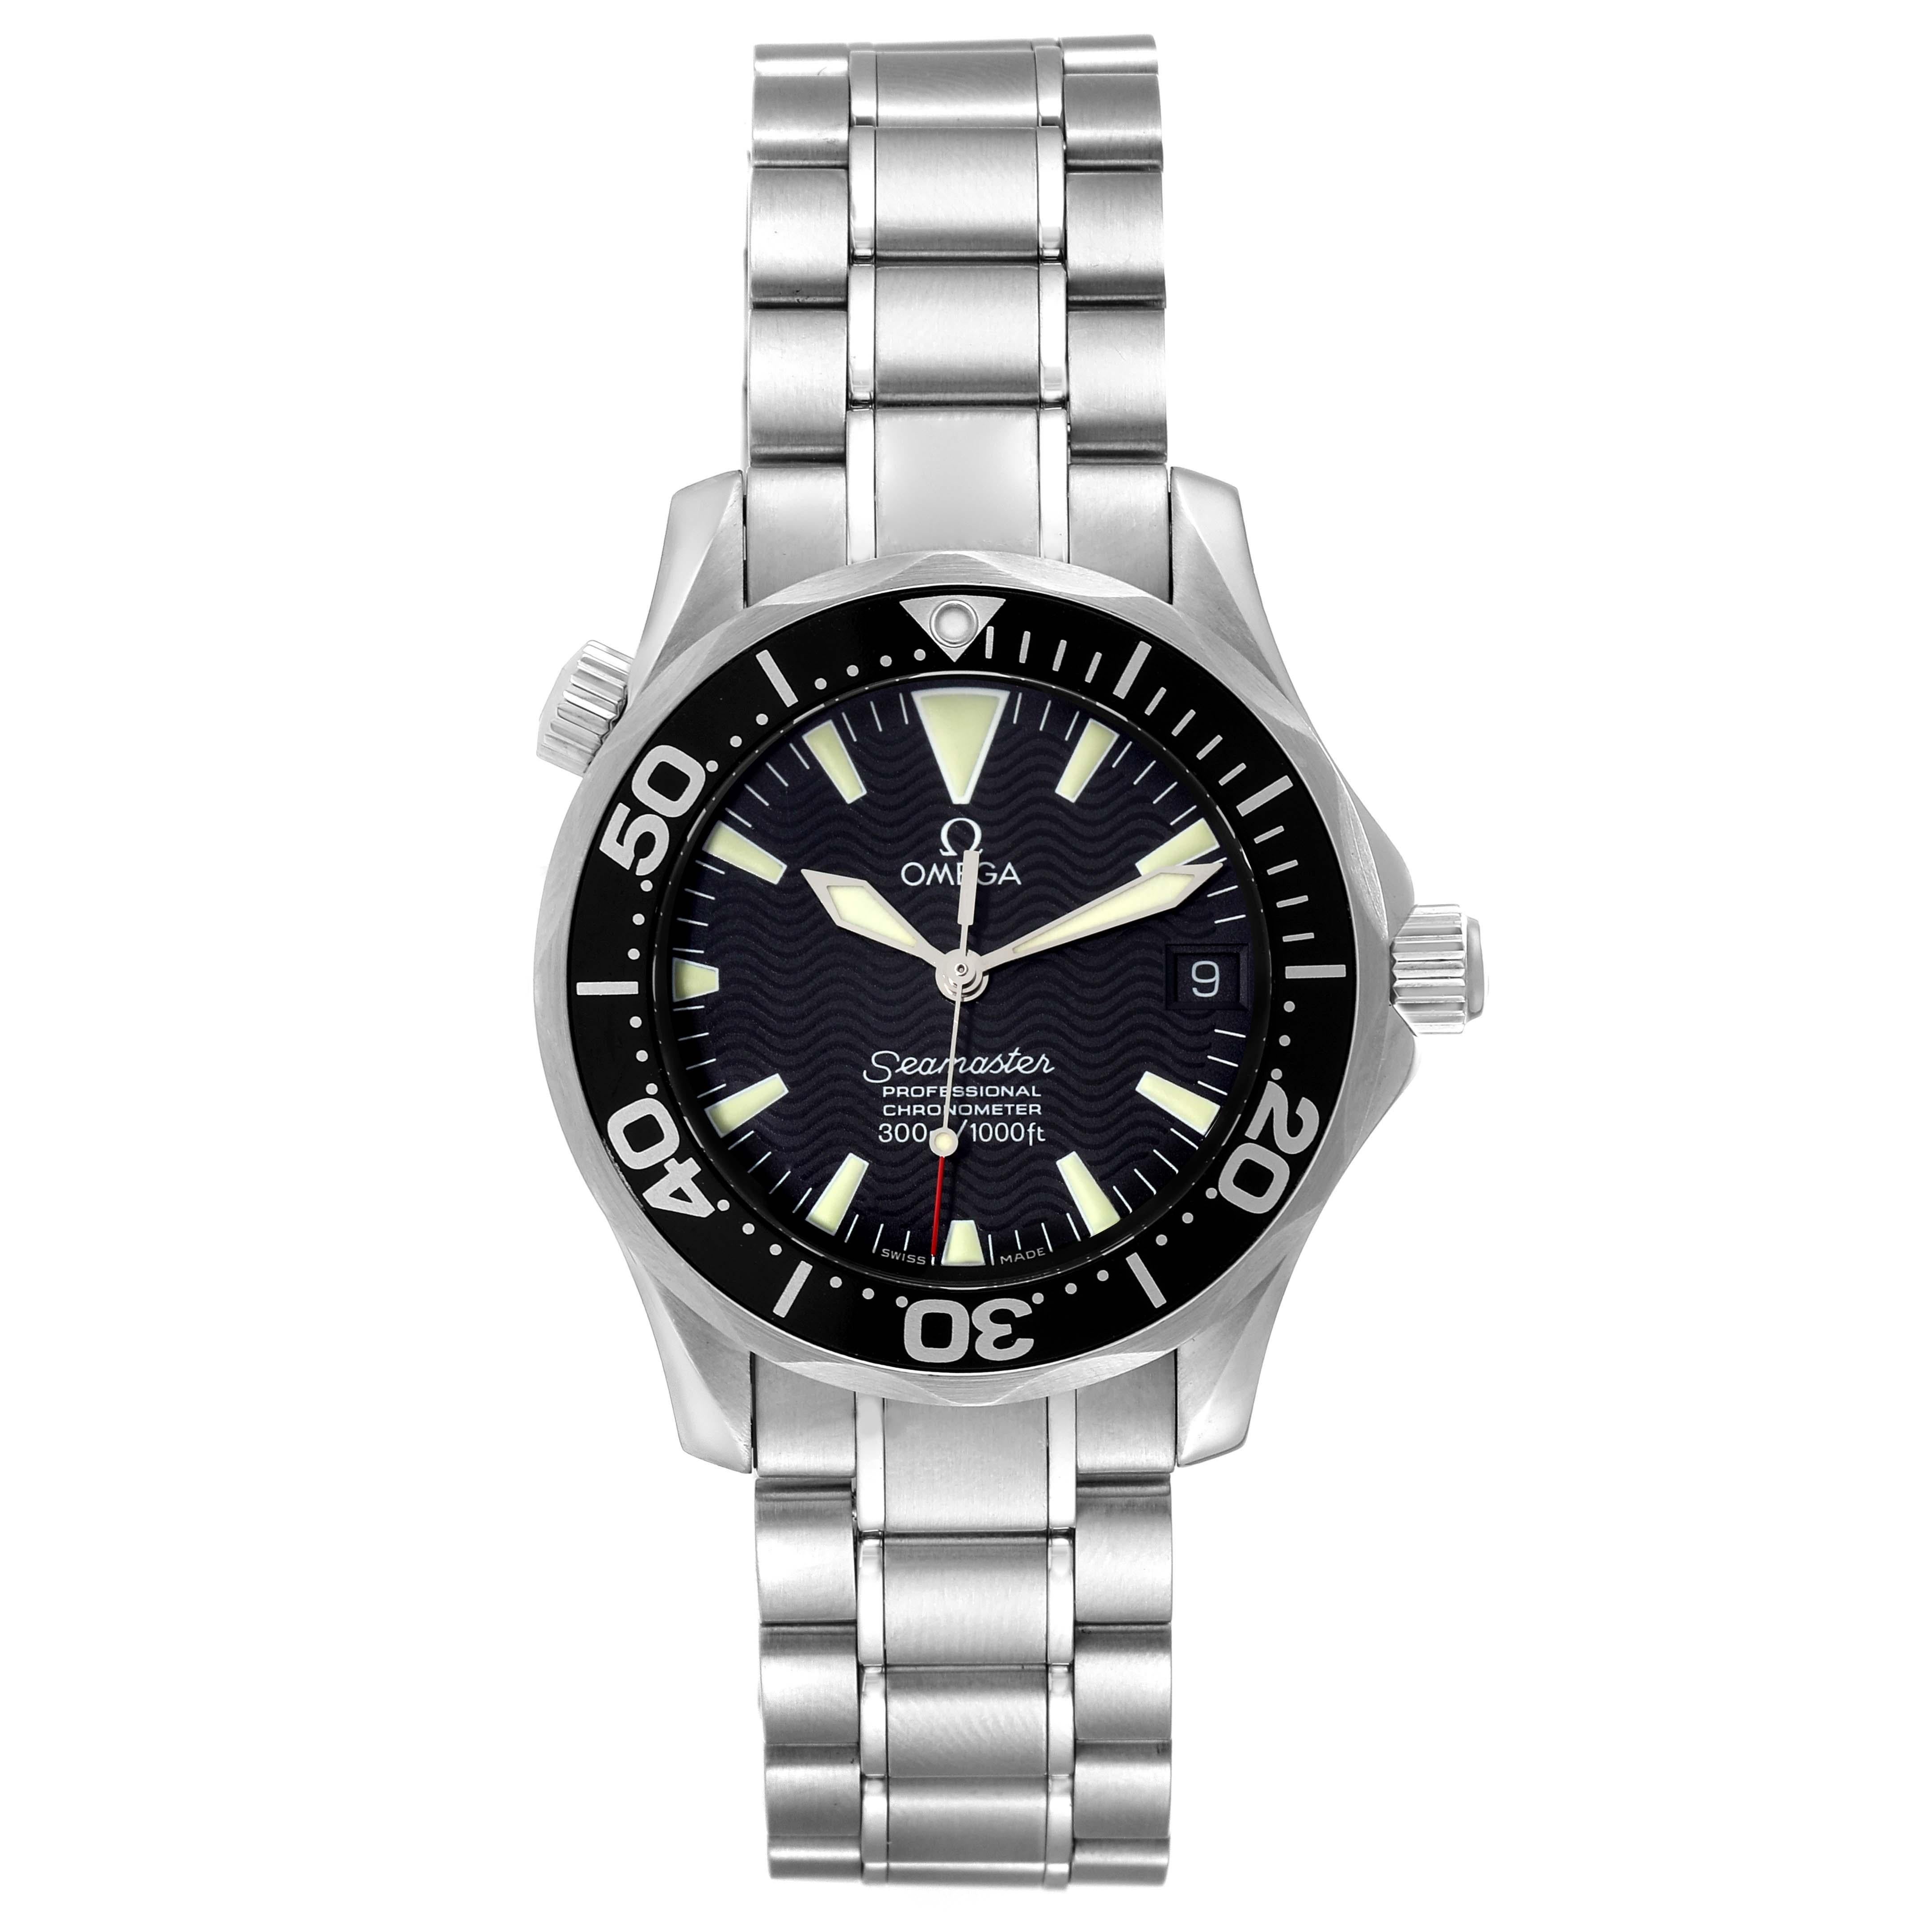 Omega Seamaster 36mm Midsize Black Wave Dial Steel Mens Watch 2252.50.00 Card. Automatic self-winding movement. Stainless steel round case 36.25 mm in diameter. Black unidirectional rotating bezel. Scratch resistant sapphire crystal. Black wave